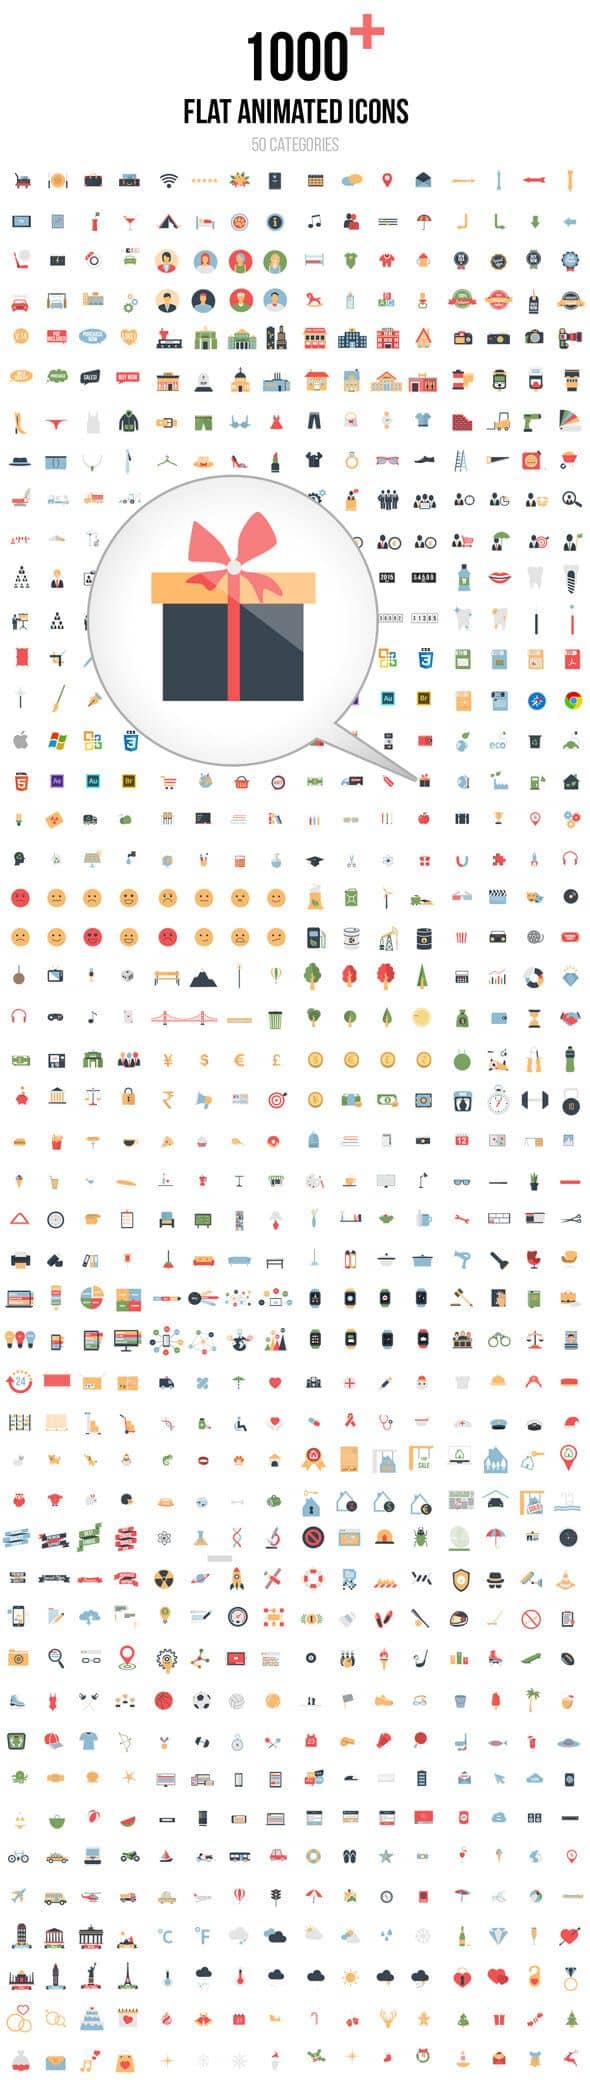 1500 Flat Animated Icons Library